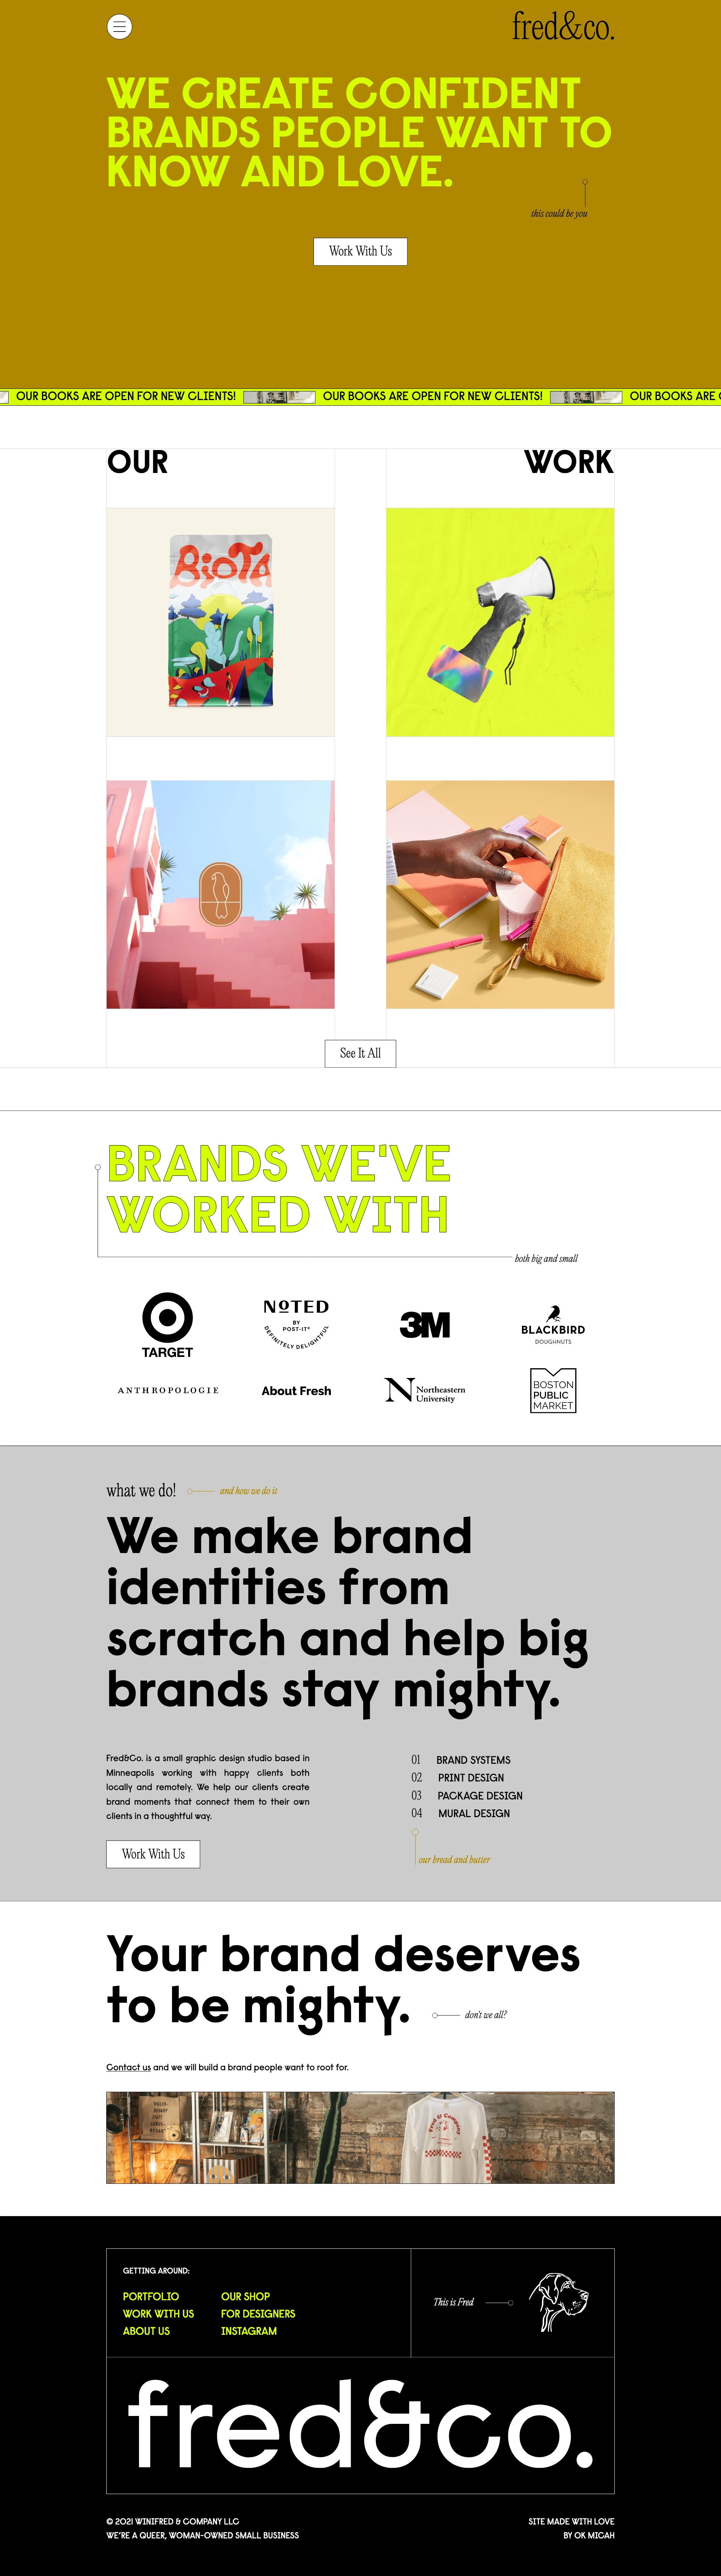 fred&co. Landing Page Example: Fred&Co. is a brand identity and graphic design studio based out of Minneapolis. We create confident brands people want to know and love.